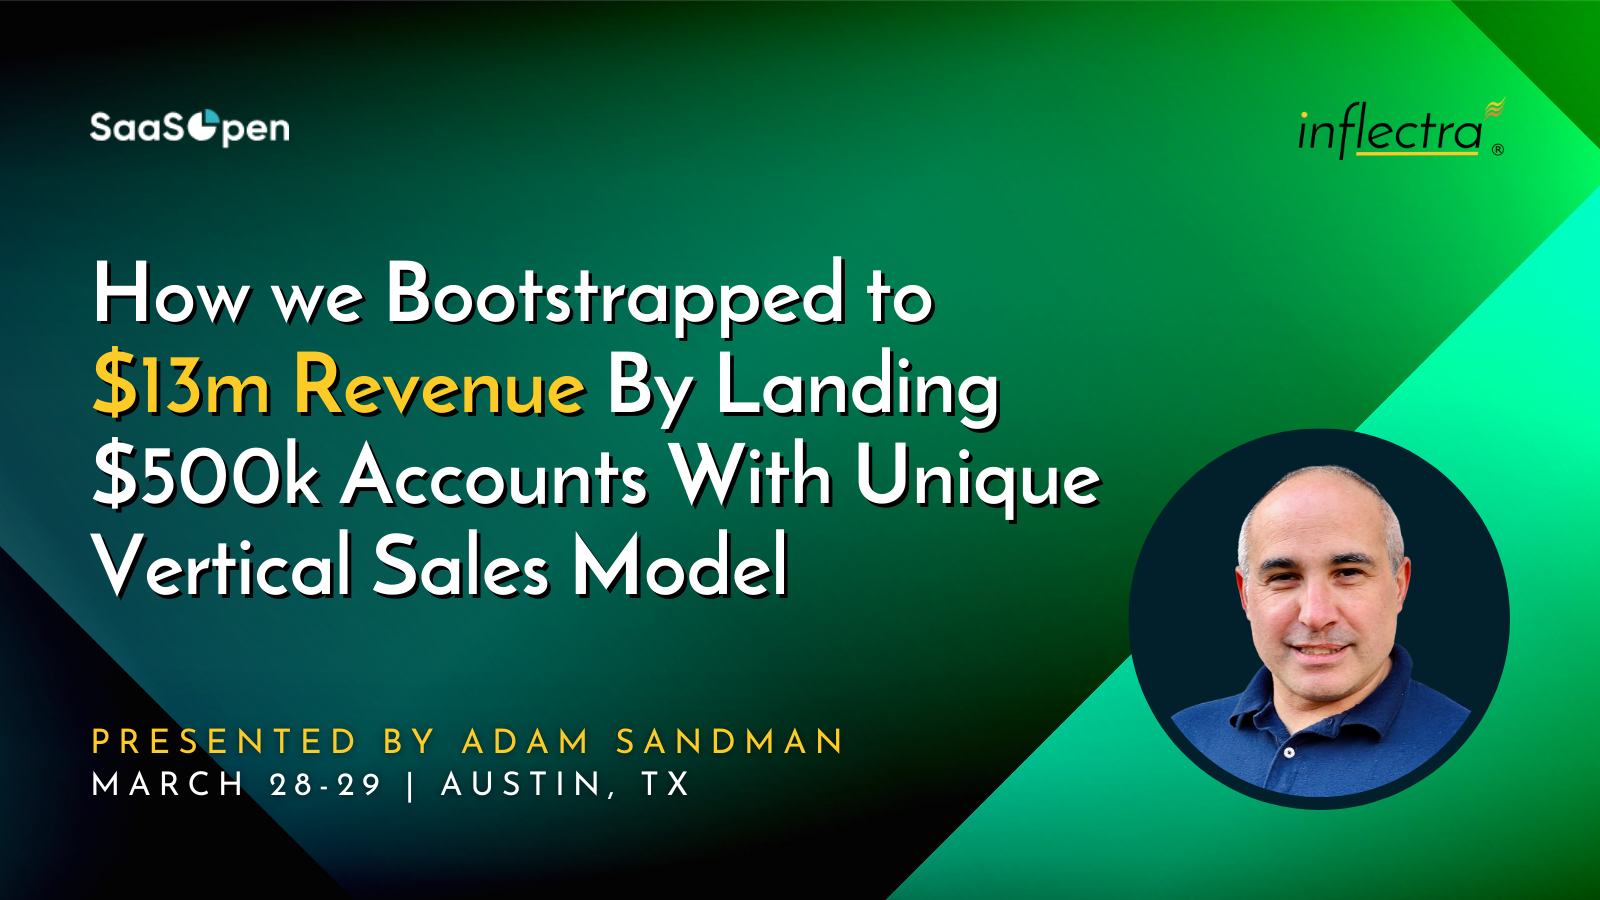 inflectra-adam-sandman-keynote-at-saasopen-conference-how-we-bootstrapped-to-thirteen-million-revenue-by-landing-five-hundred-thousand-dollar-accounts-with-unique-vertical-sales-model-image